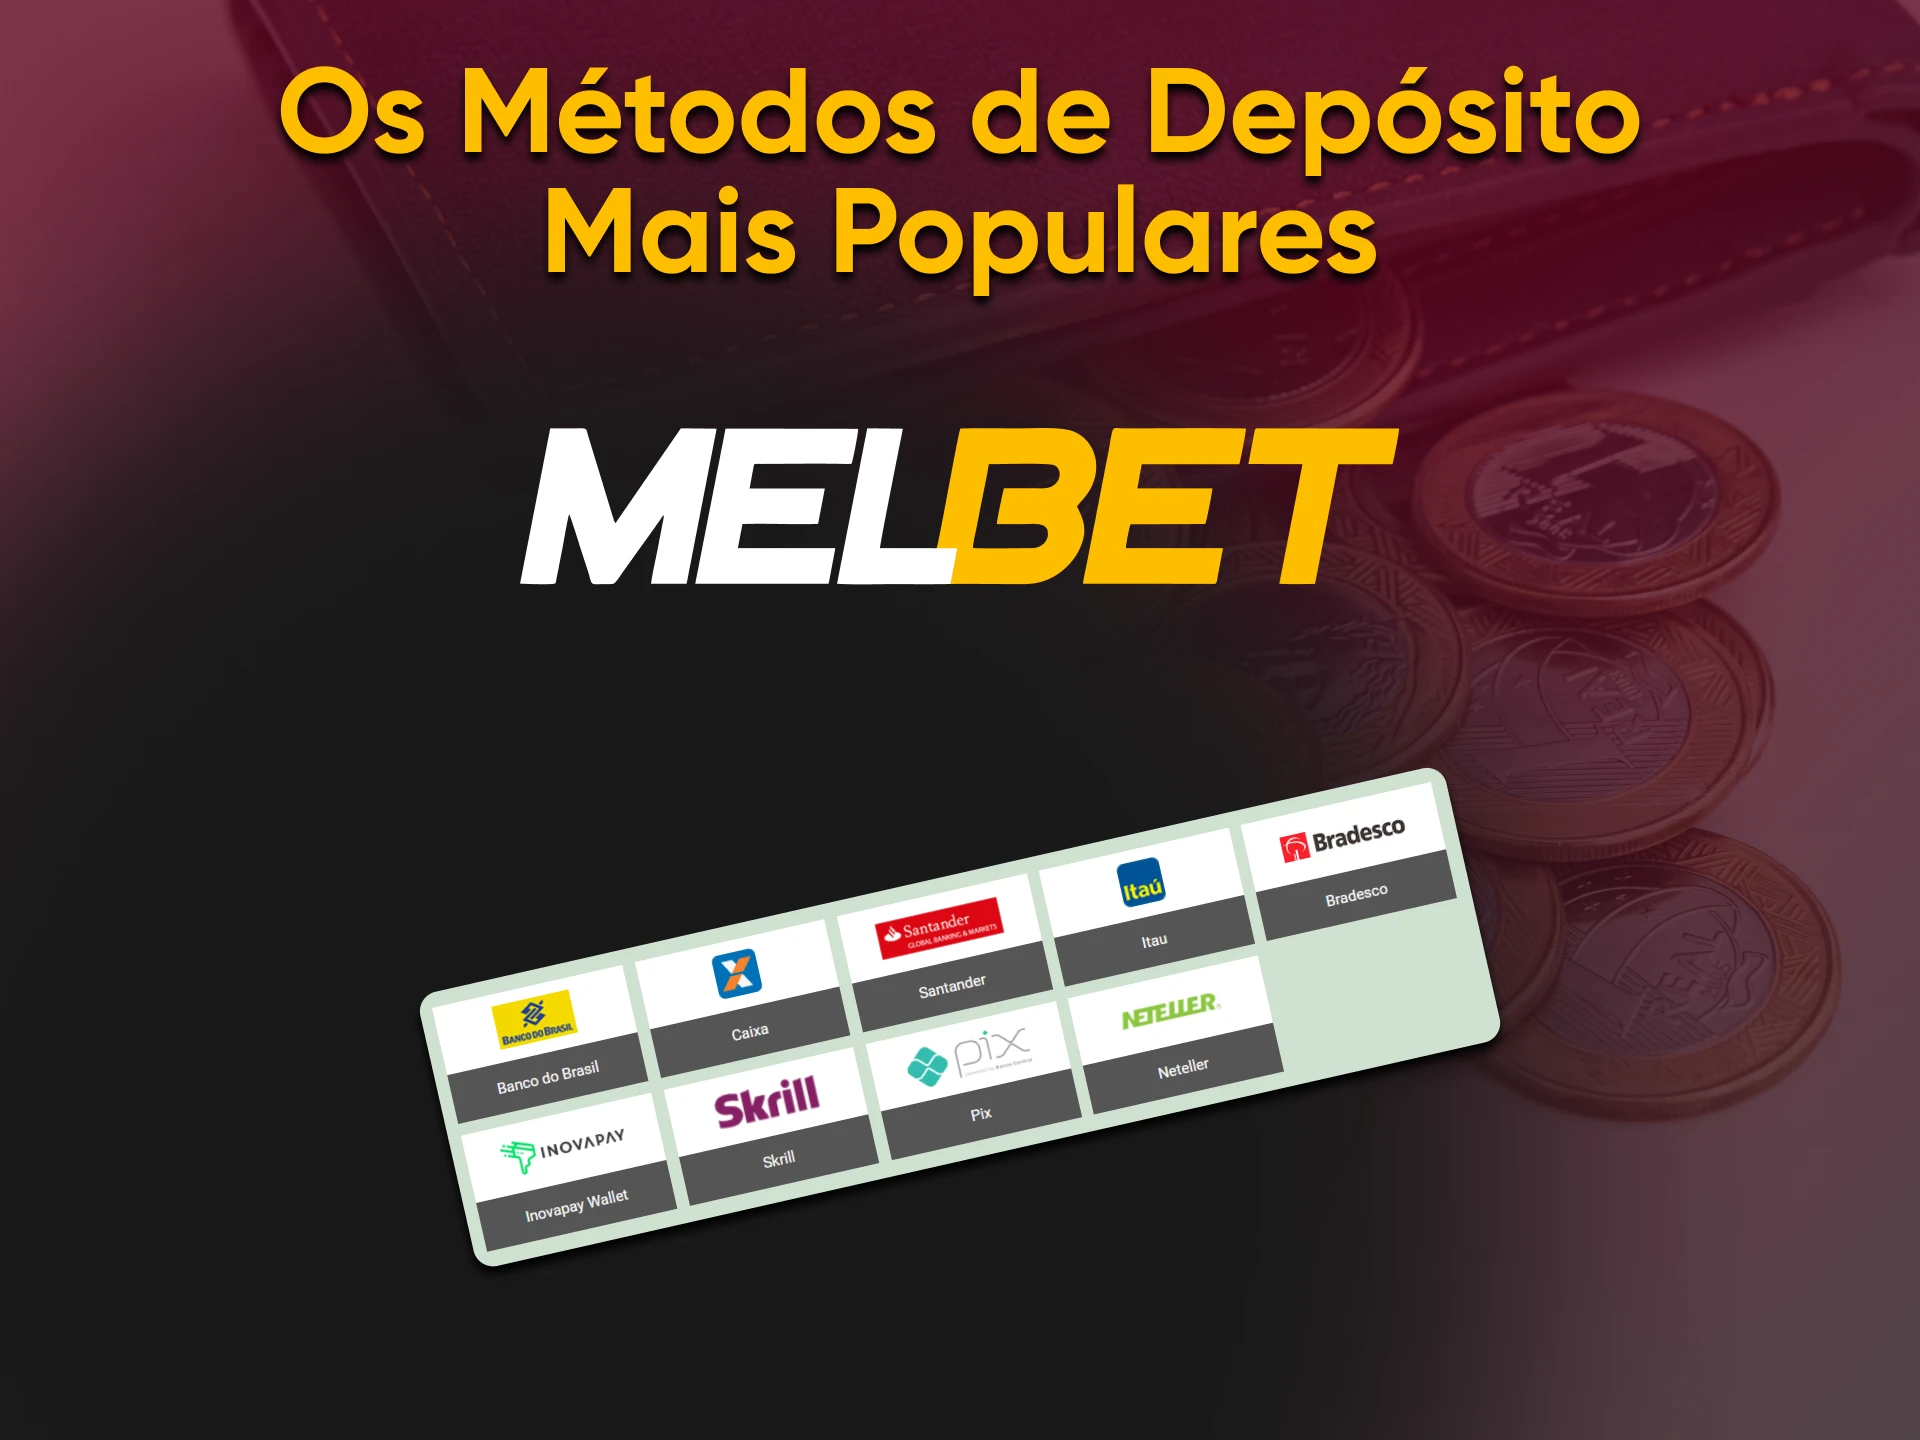 If you need to make a deposit, please choose a Melbet method.